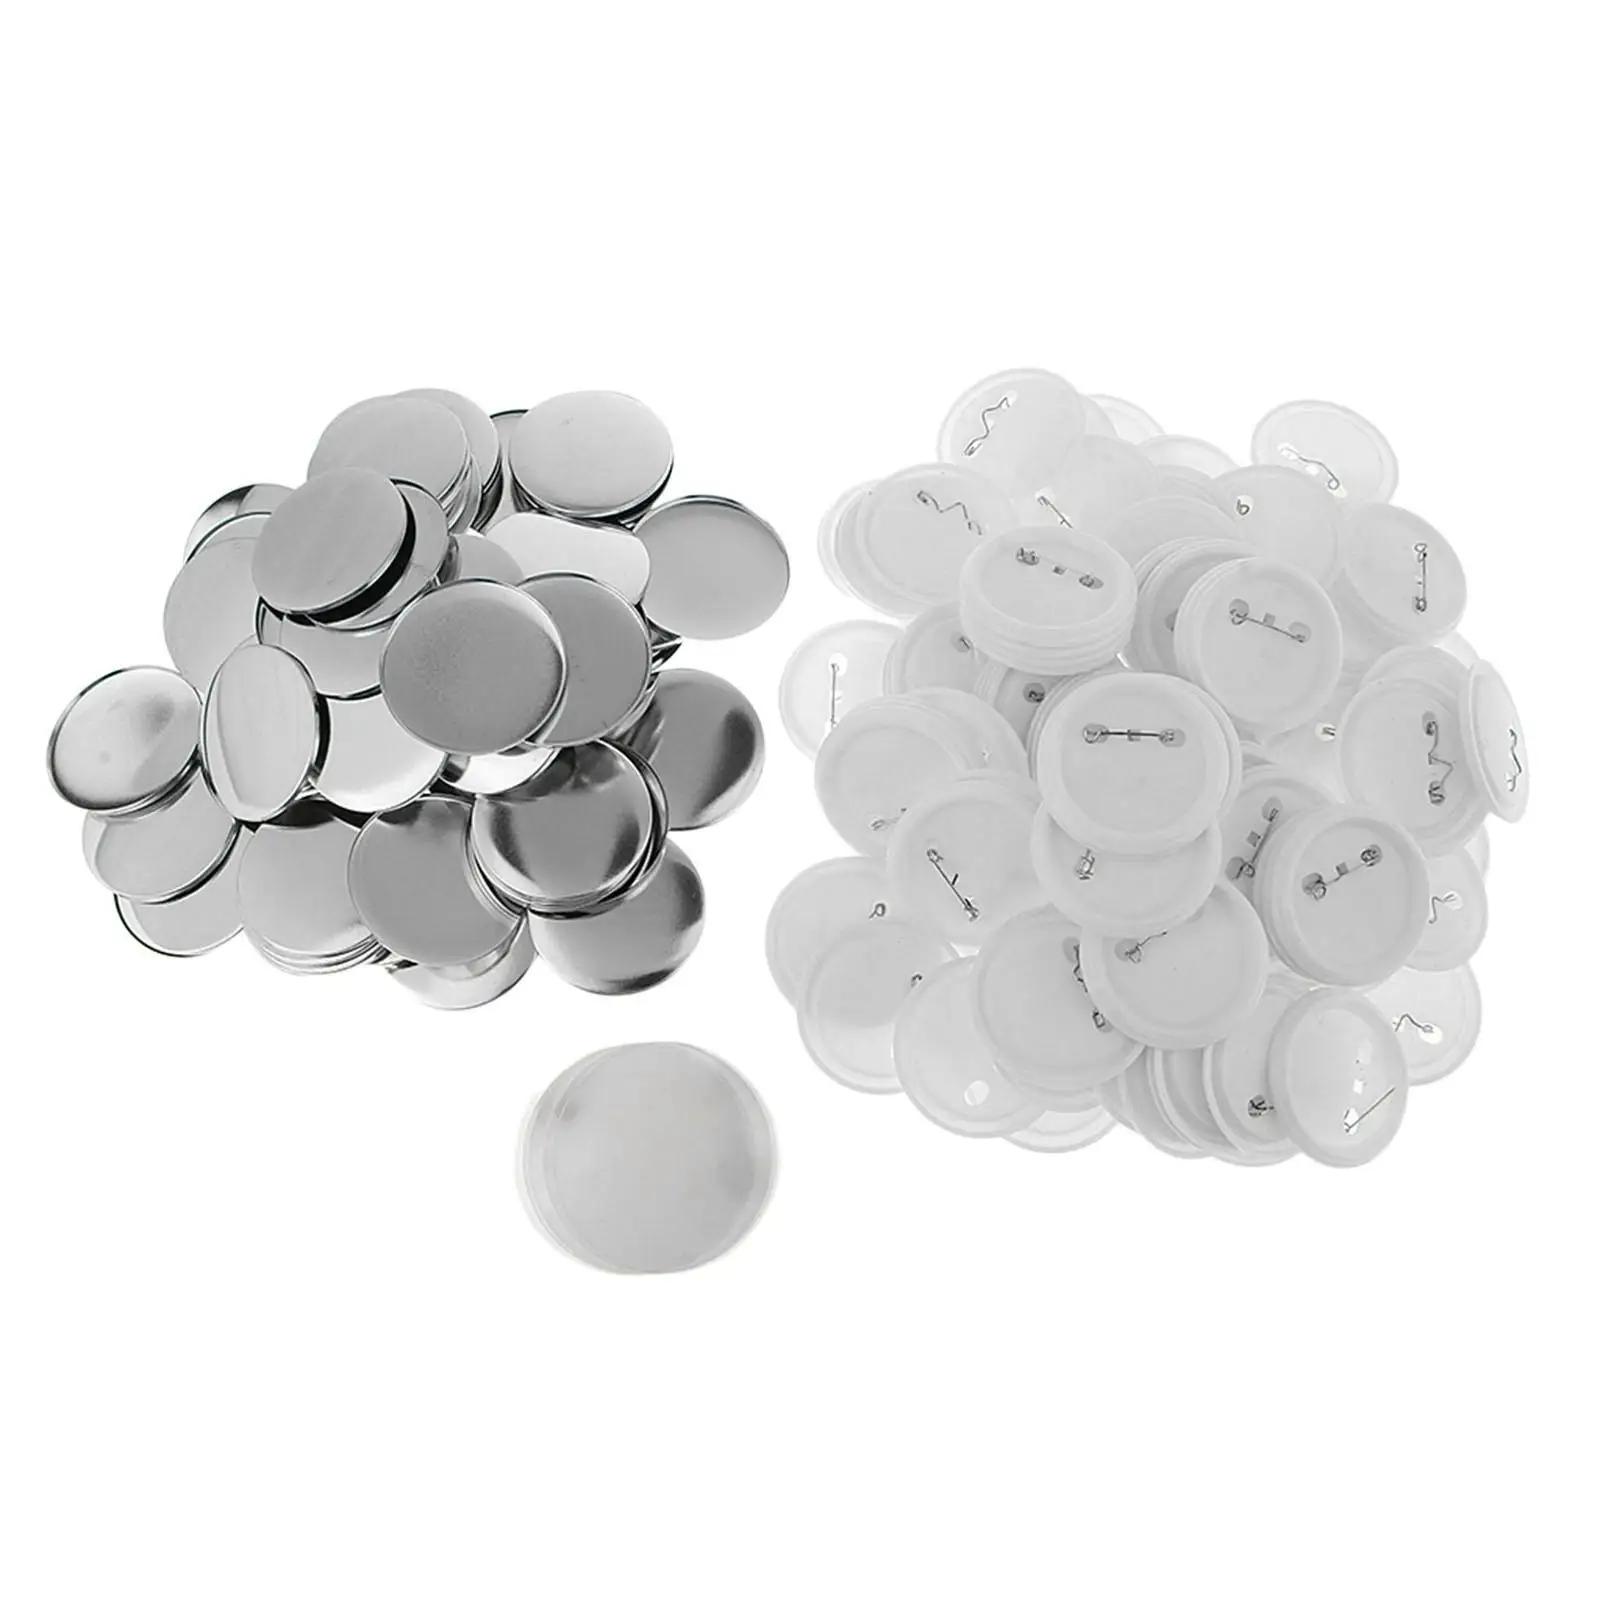 Blank Button Making Supplies 50mm DIY Crafts Metal Button Pin Badge Kit for Button Maker Machine Souvenirs Badge Making Presents